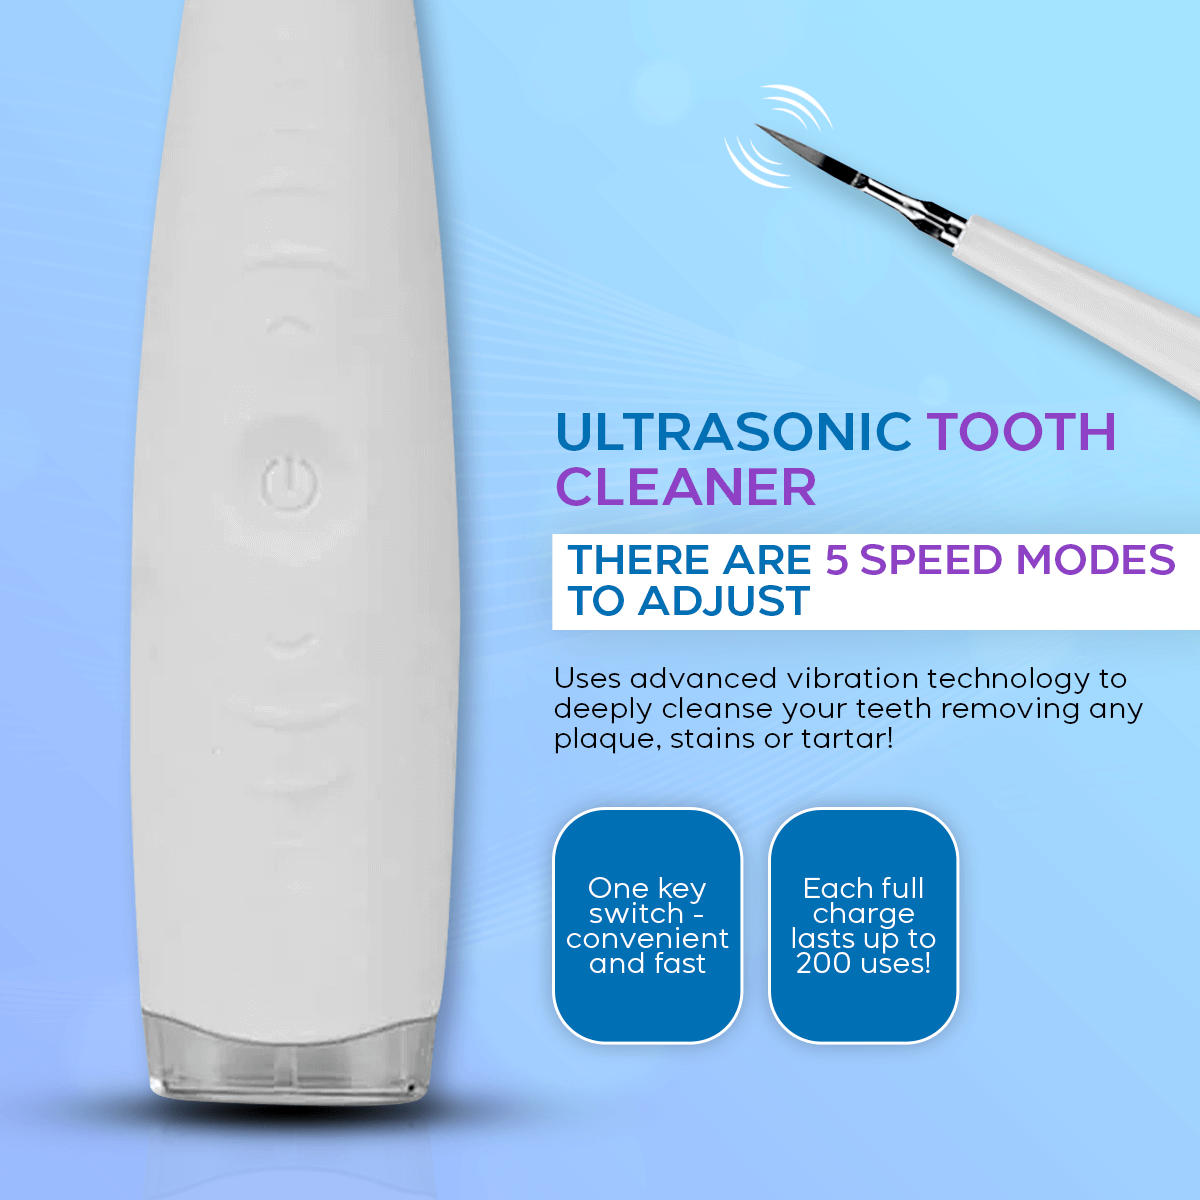 Ultrasonic Tooth Cleaner | Smile Therapy - Smile Therapy